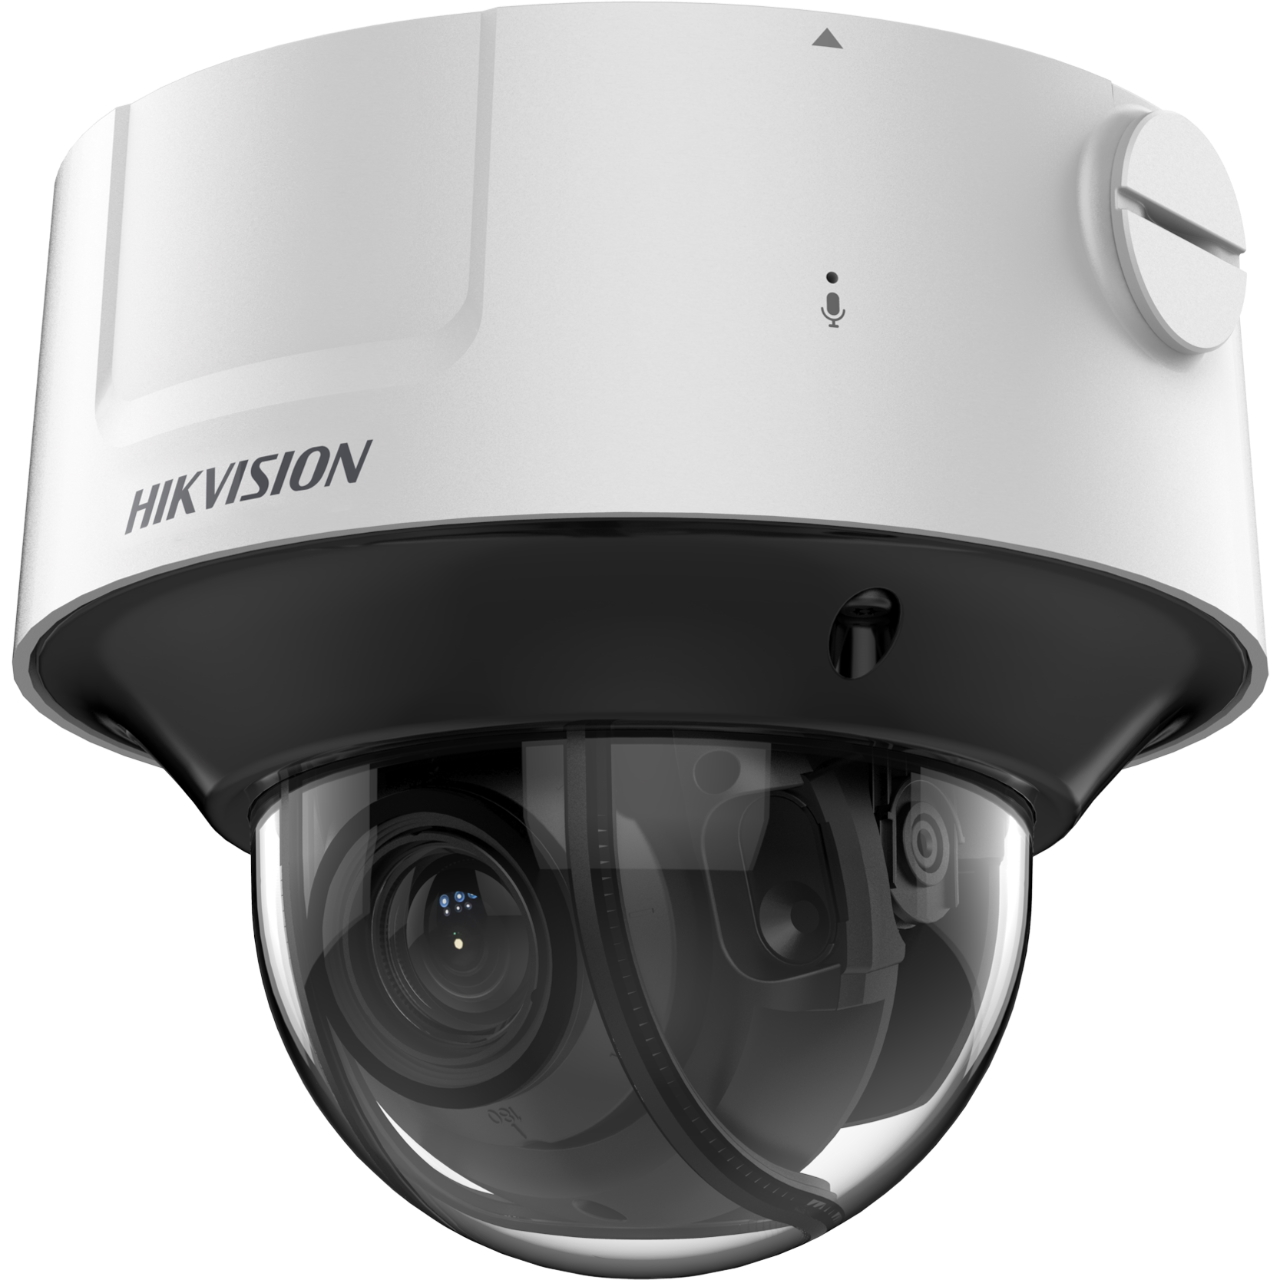 20000659 Hikvision DeepinView 4MP dome camera, VF, 2.8-12mm